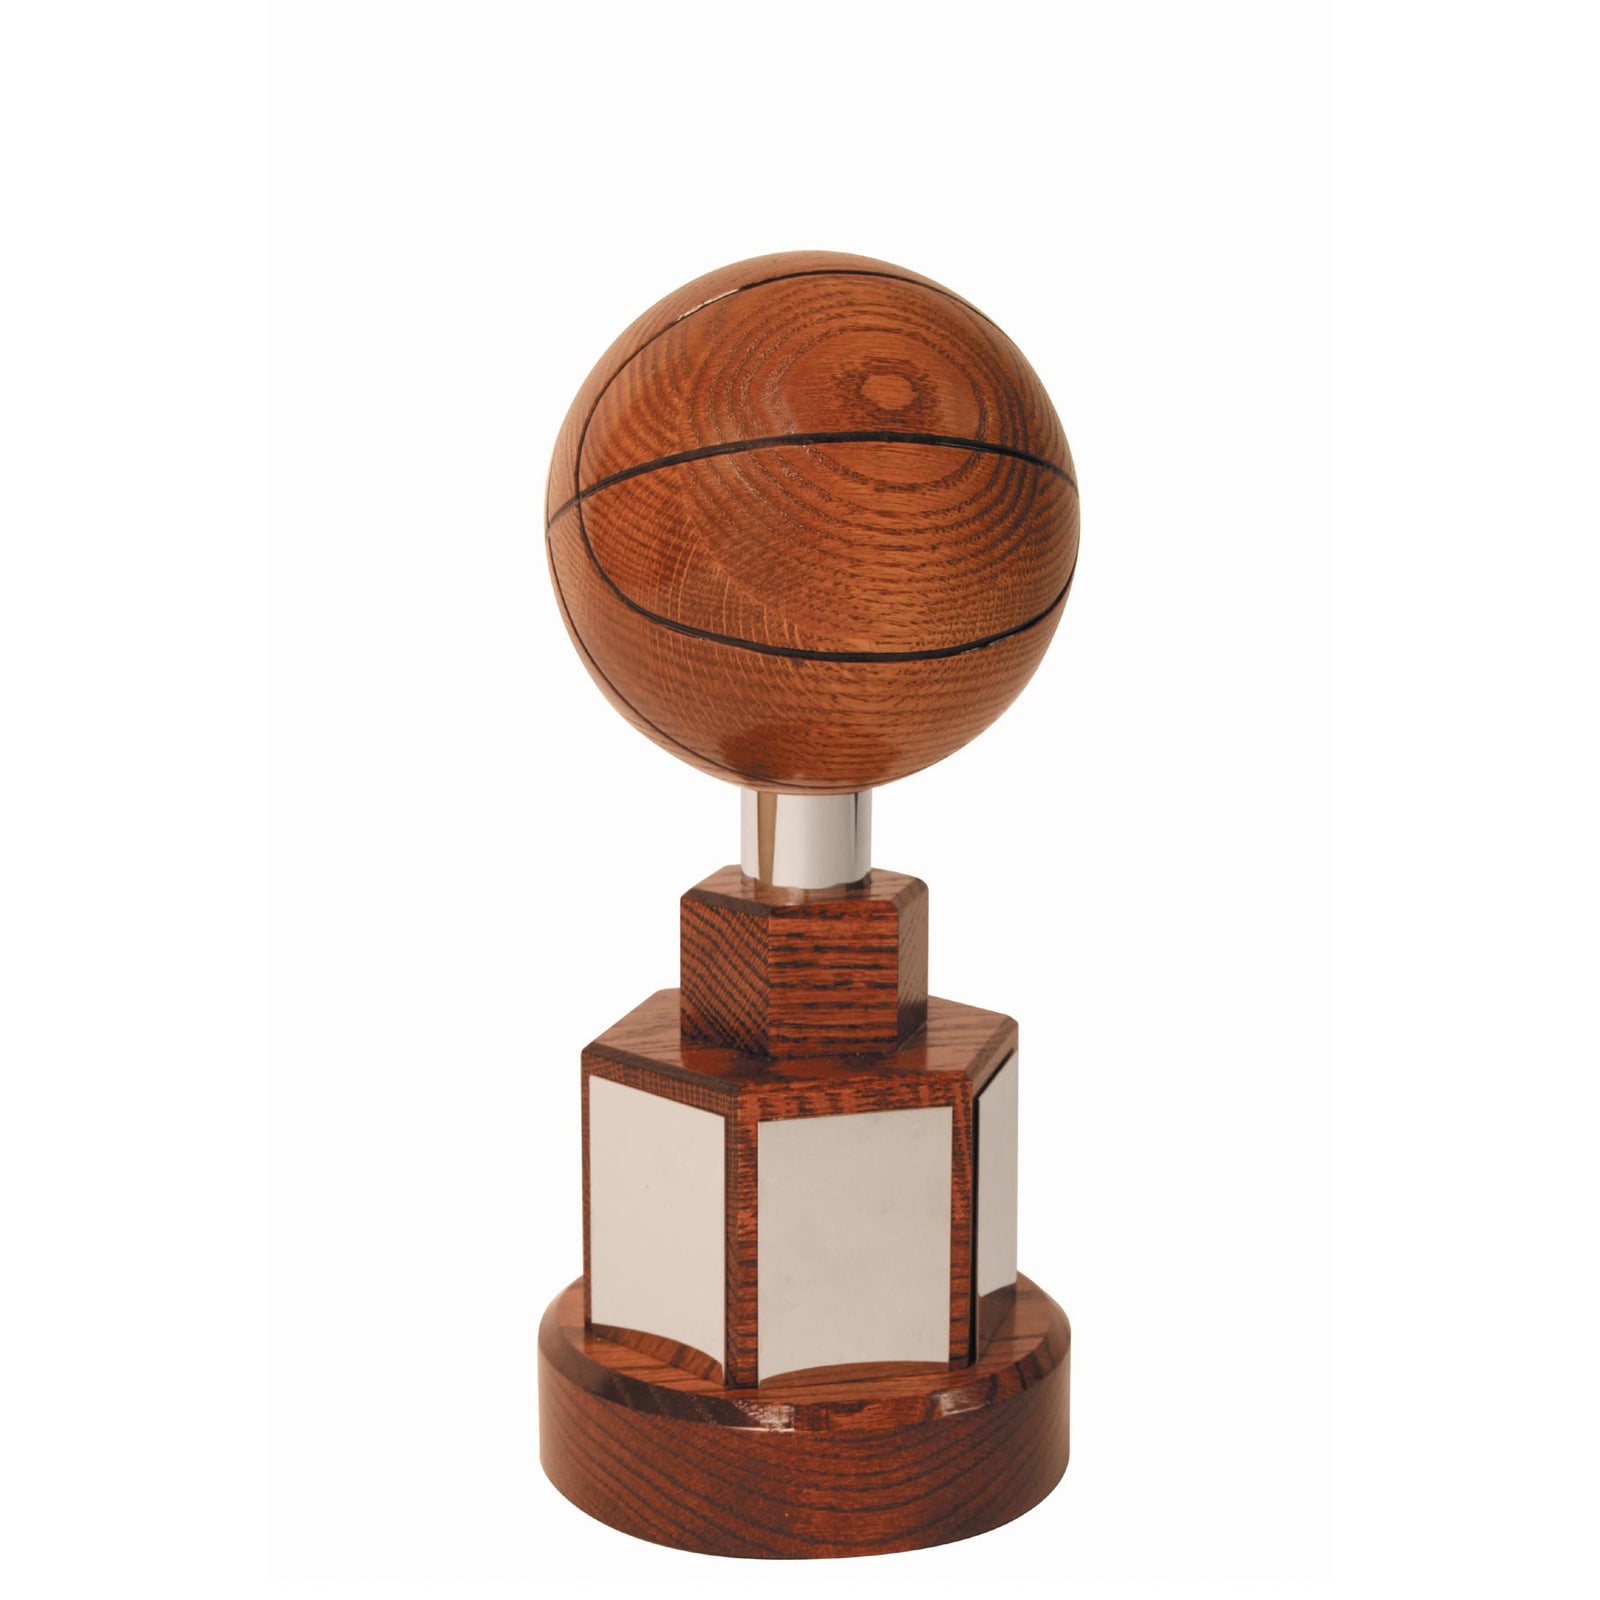 Basketball pictures, Trophy, Picture